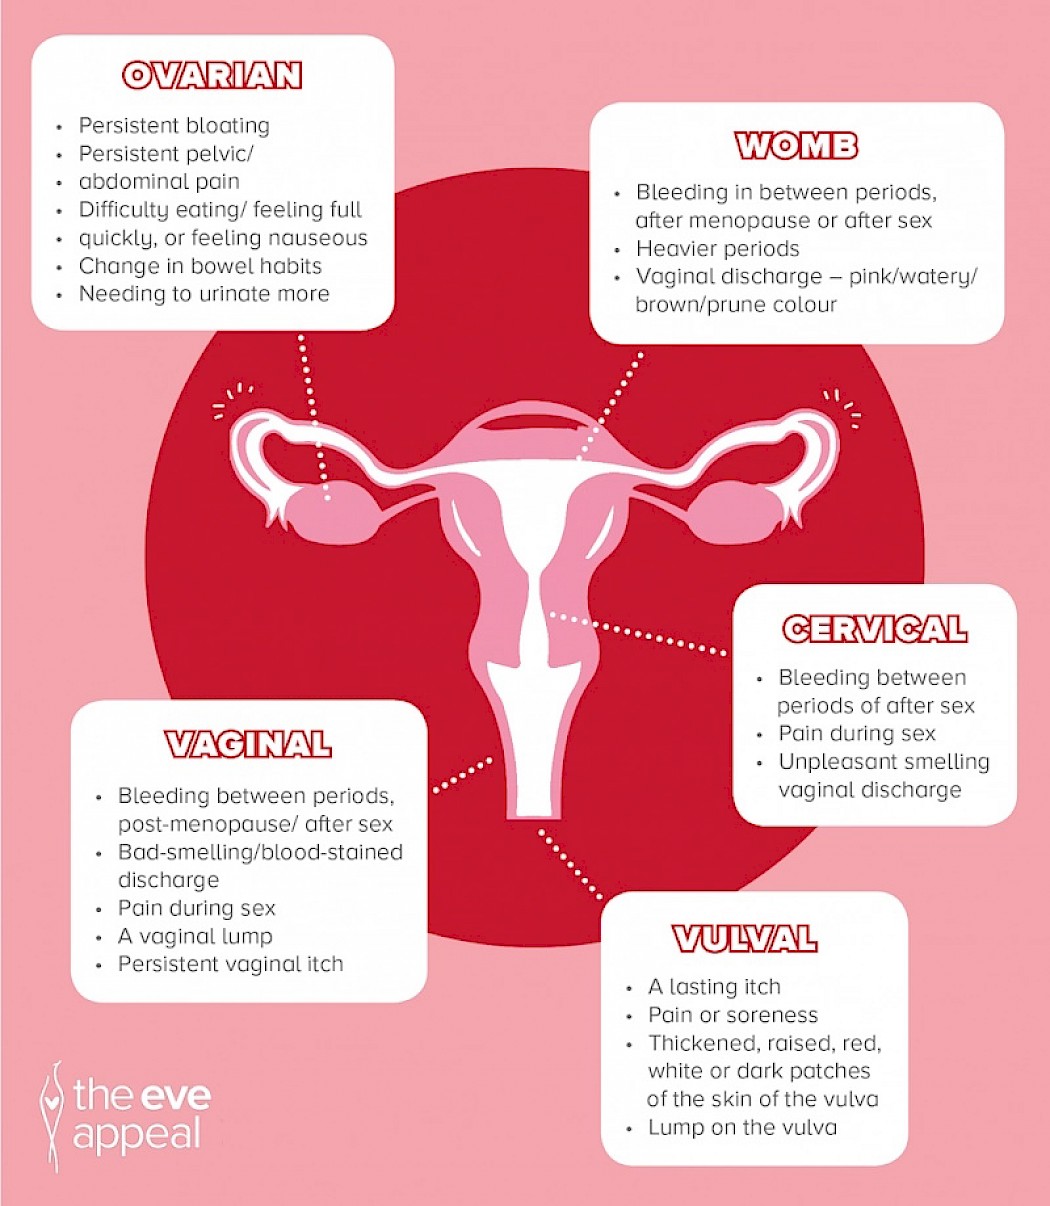 This is a great infographic by The Eve Appeal which highlights the symptoms of each gynae cancer: